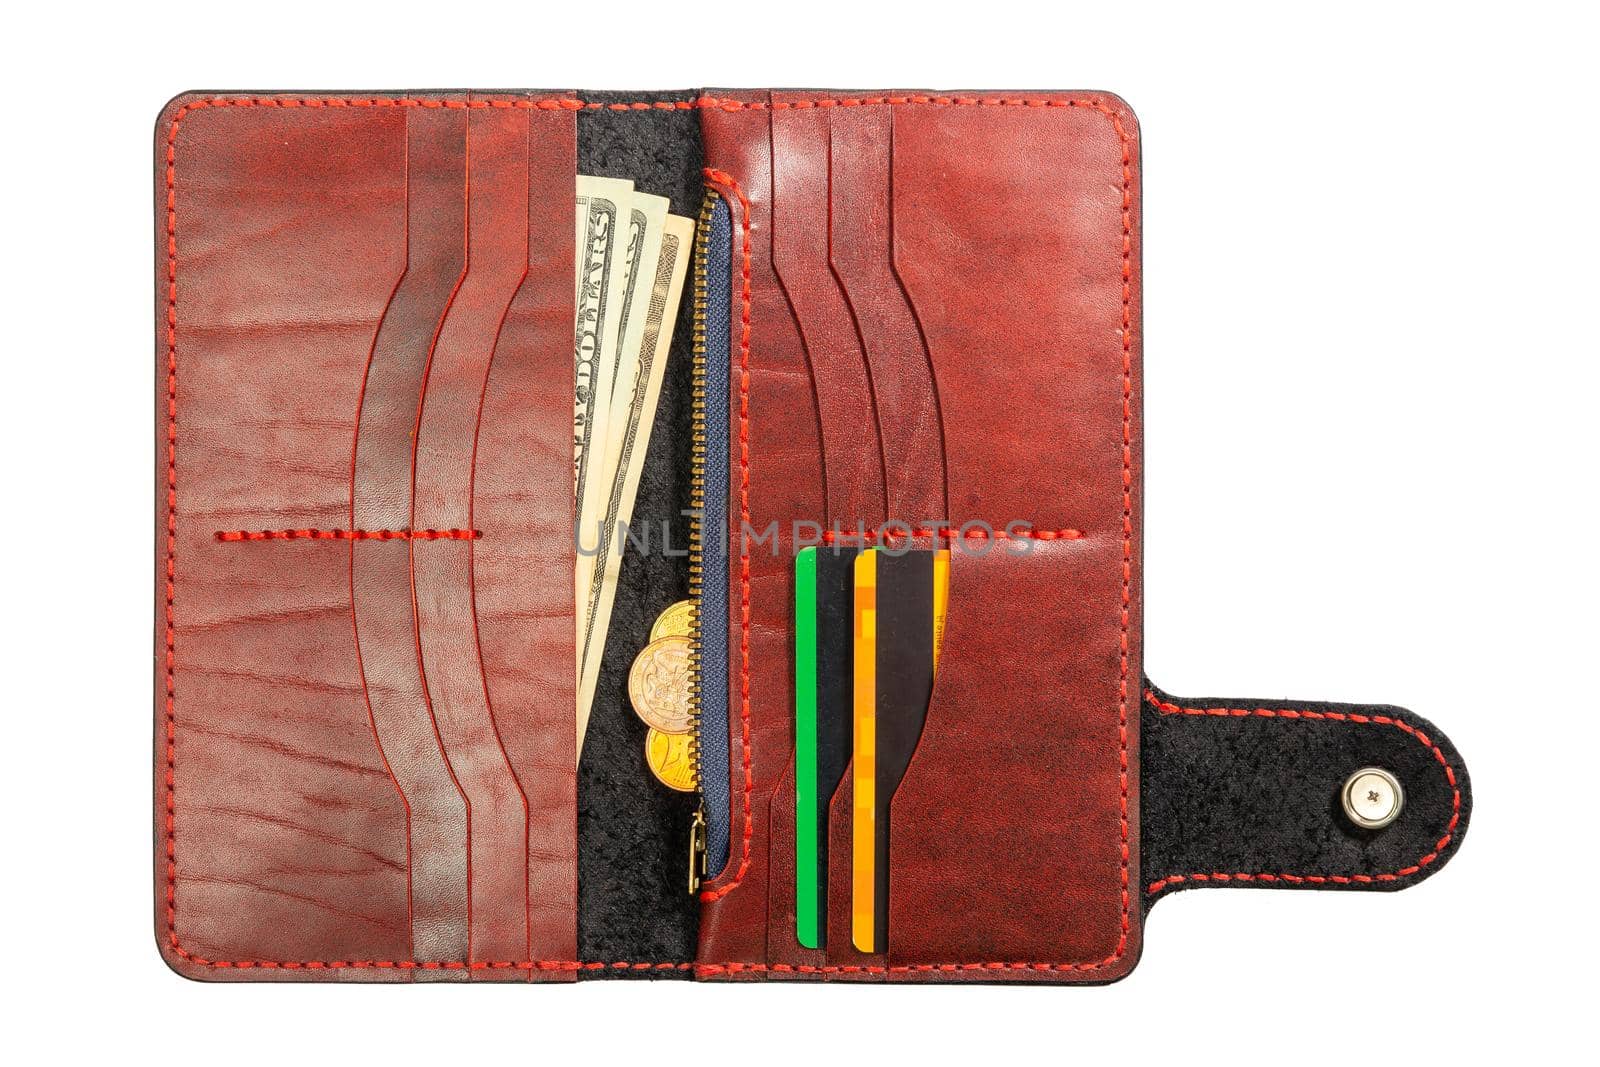 Open red leather clutch with money and credit cards isolated on white background.